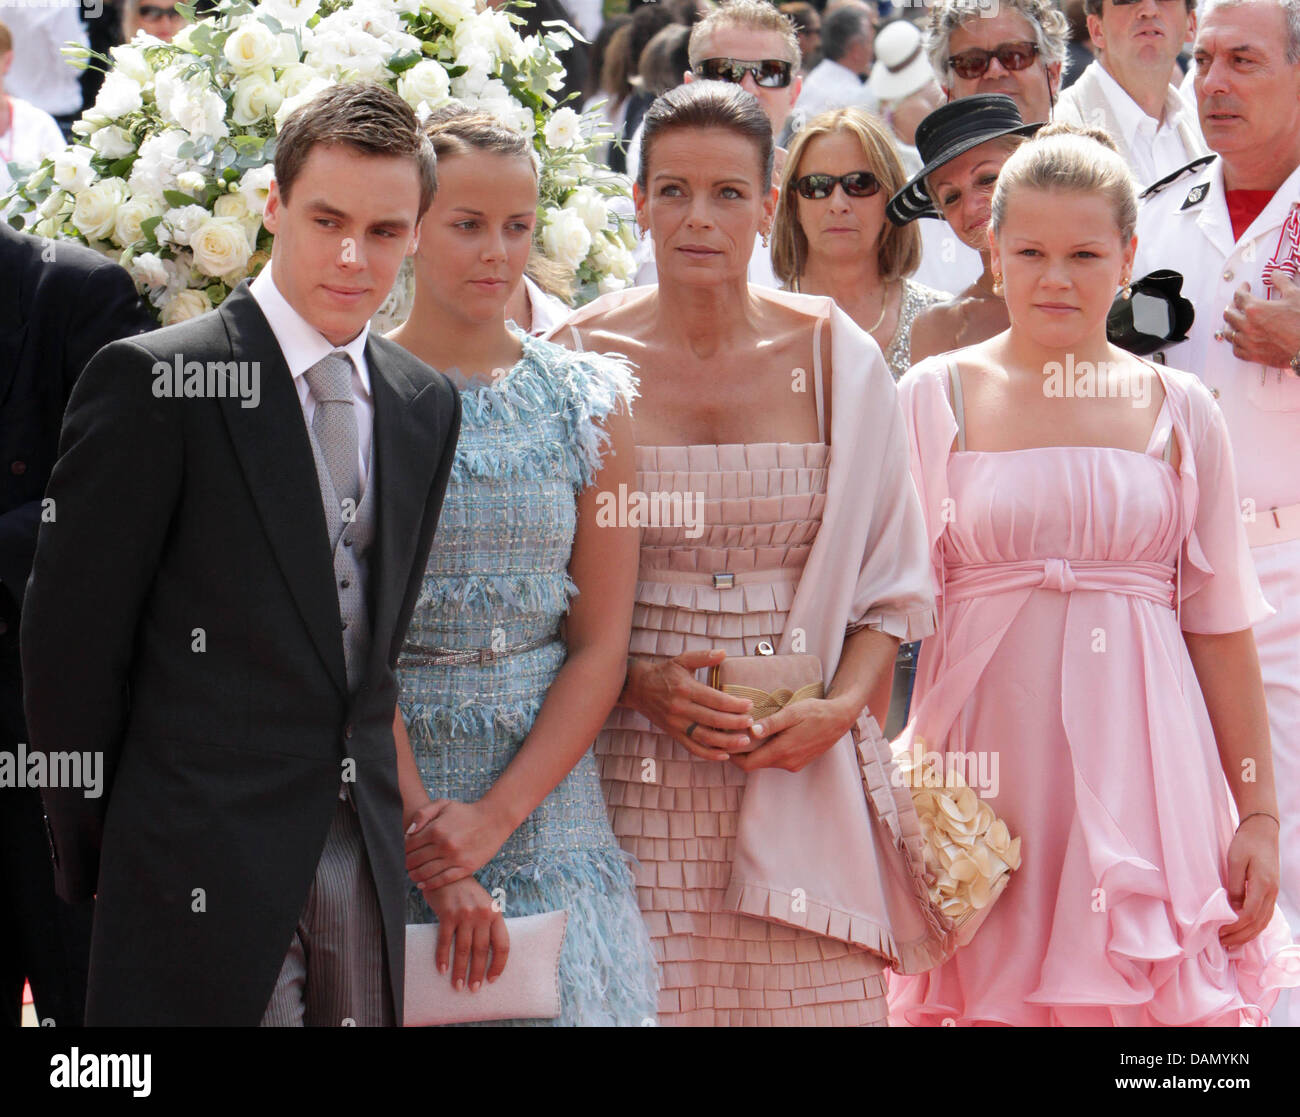 Princess Stephanie of Monaco with her children Louis, Pauline and Camille arrive for the religious wedding of Prince Albert II and Charlene Wittstock in the Prince's Palace in Monaco, 02 July 2011. Some 3500 guests are expected to follow the ceremony in the Main Courtyard of the Palace. Photo: Albert Nieboer Stock Photo